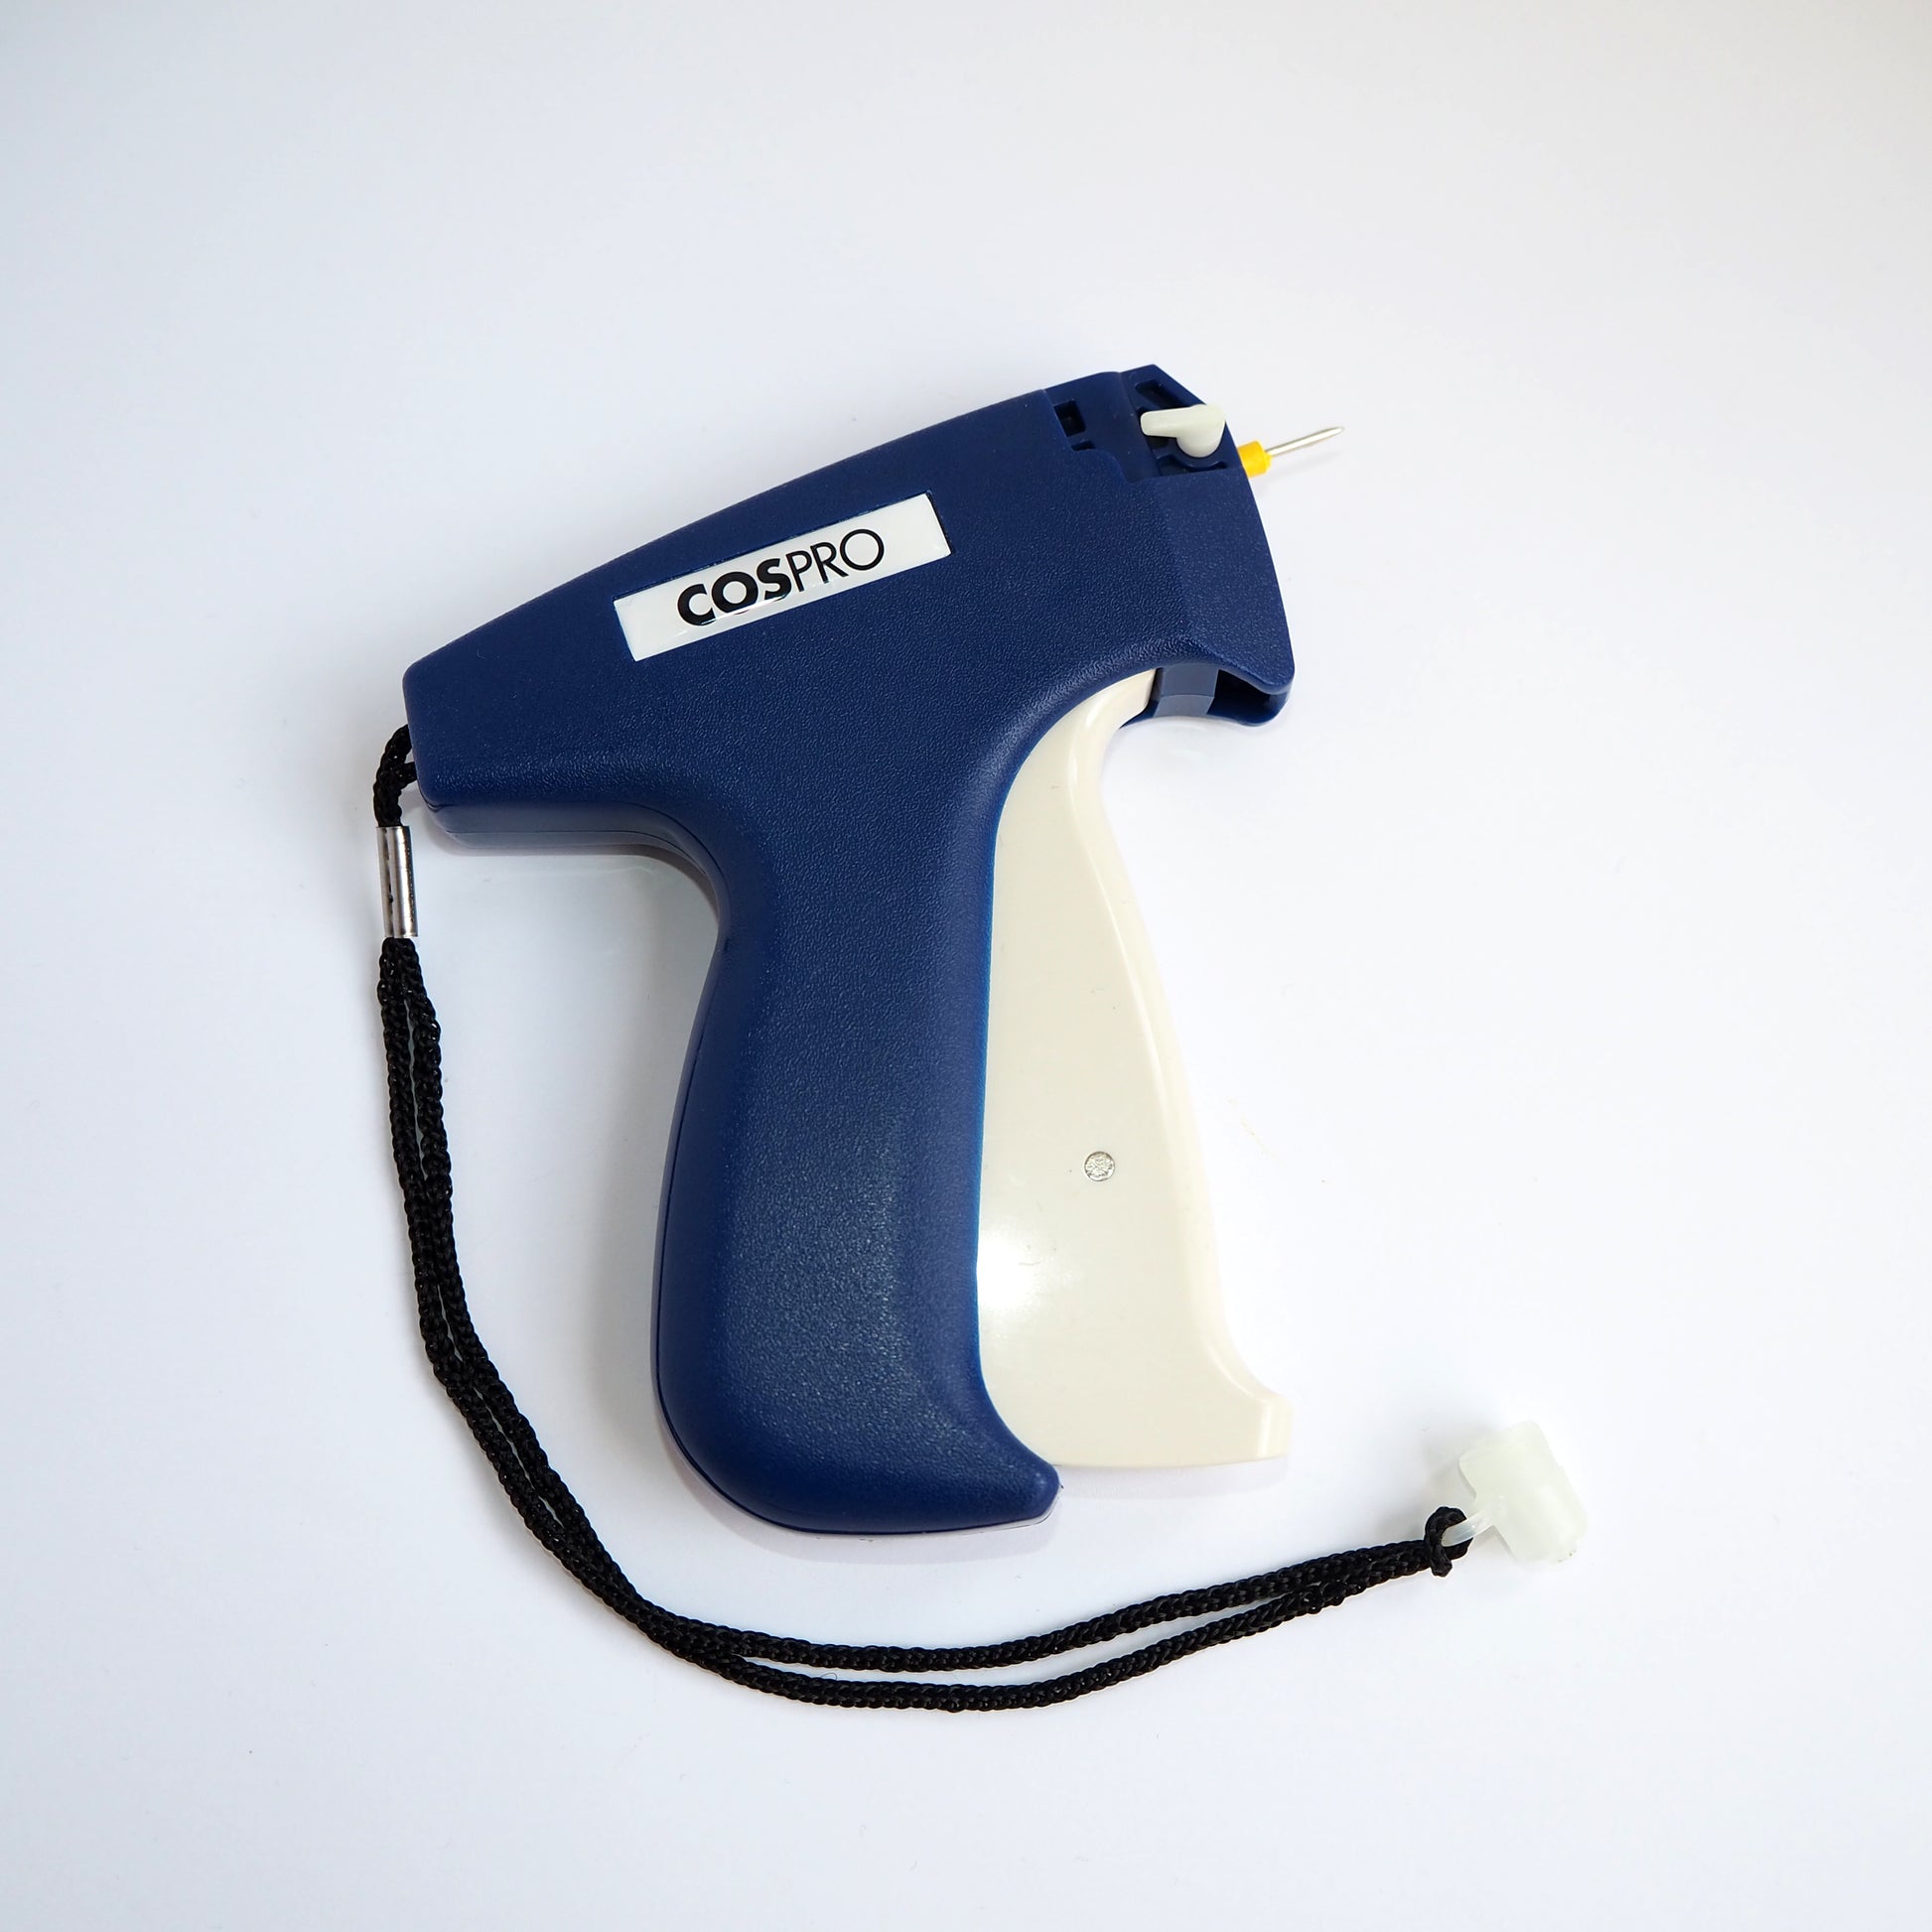 COSPRO Micro Fine Tagging Gun  High-Quality Precision for Efficient On Set  Repairs